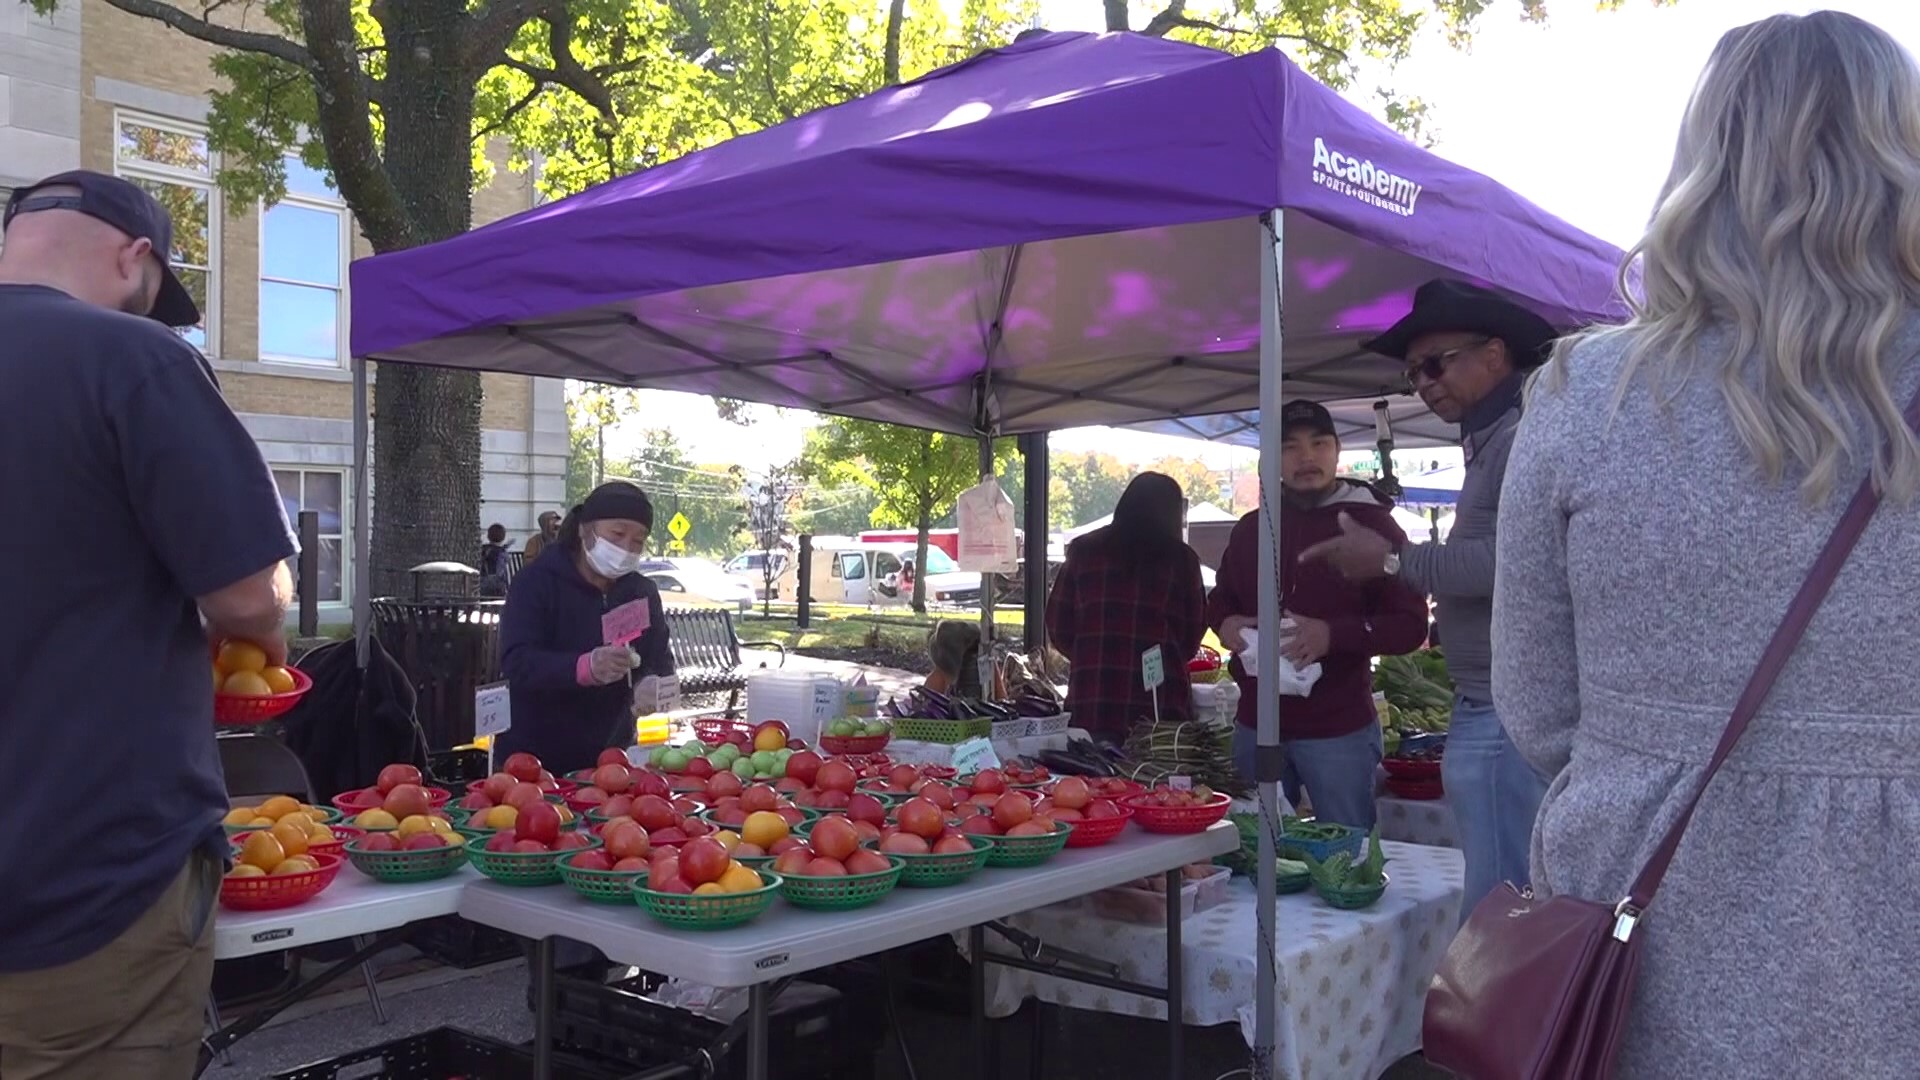 The Bentonville Farmer's Market is open every Saturday from 7:30 a.m. to 1 p.m. from now until October. Daren spoke with manager Stephanie Marpe about the market.